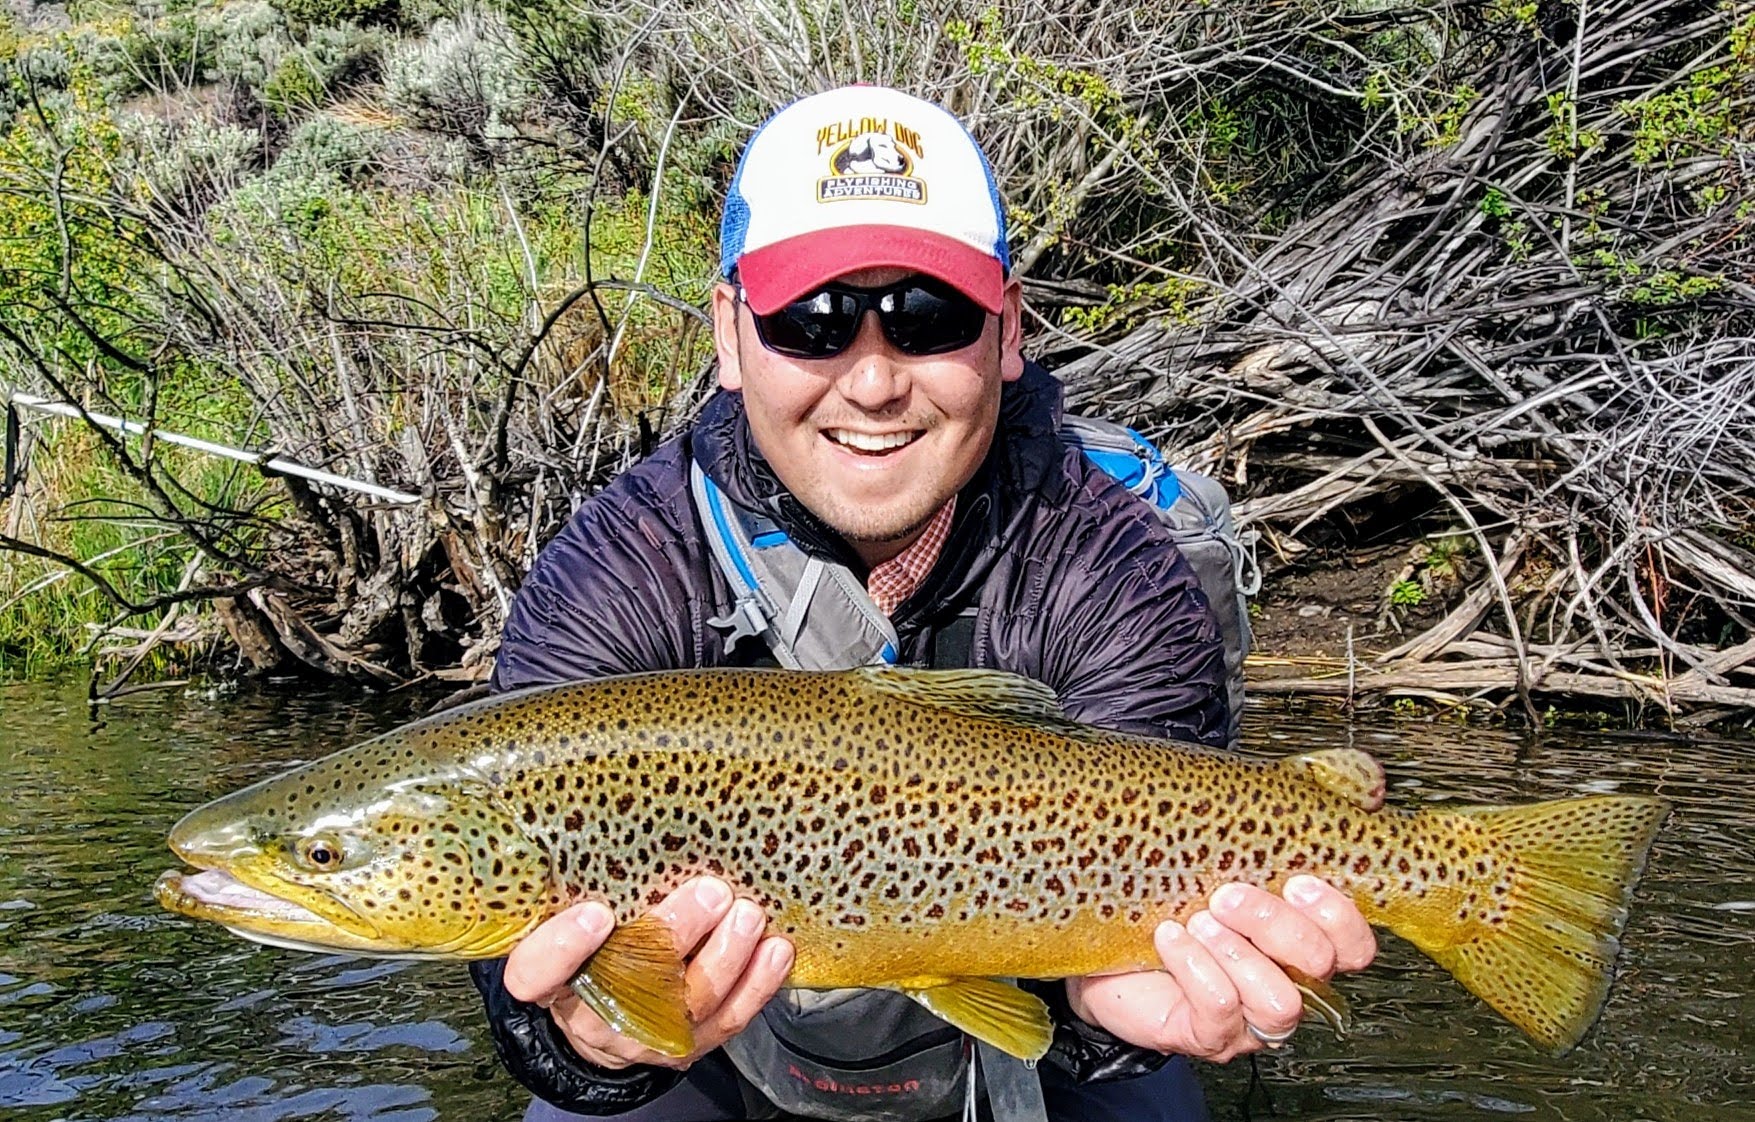 An Eastern Sierra Fishing Guide and angler standing in the East Walker River and holding a trophy brown trout.